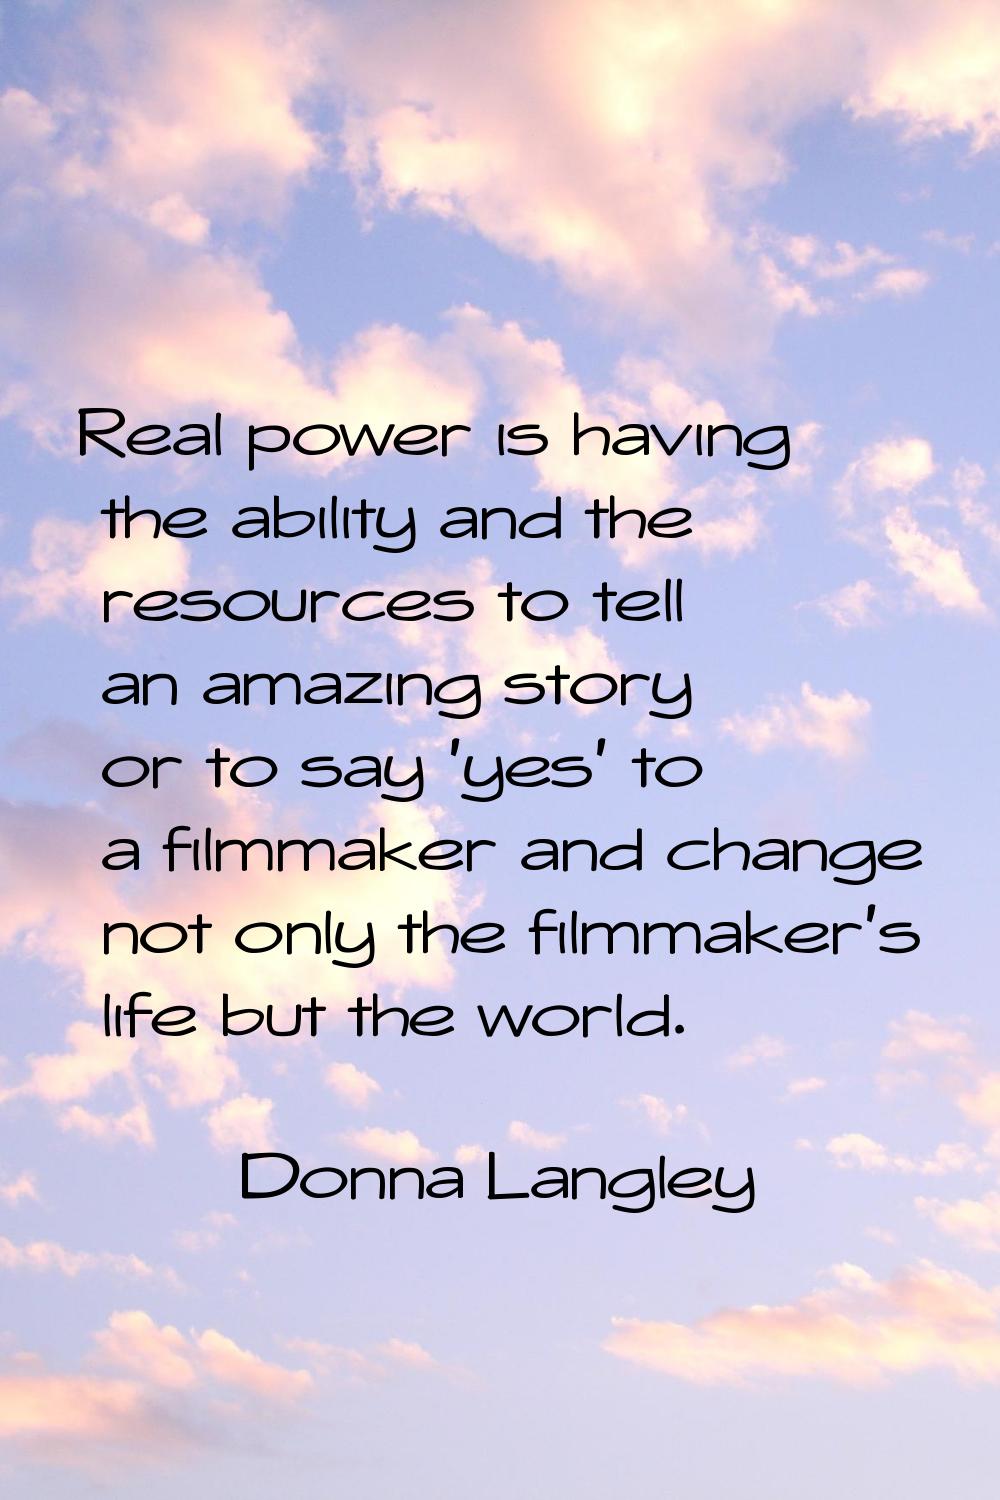 Real power is having the ability and the resources to tell an amazing story or to say 'yes' to a fi